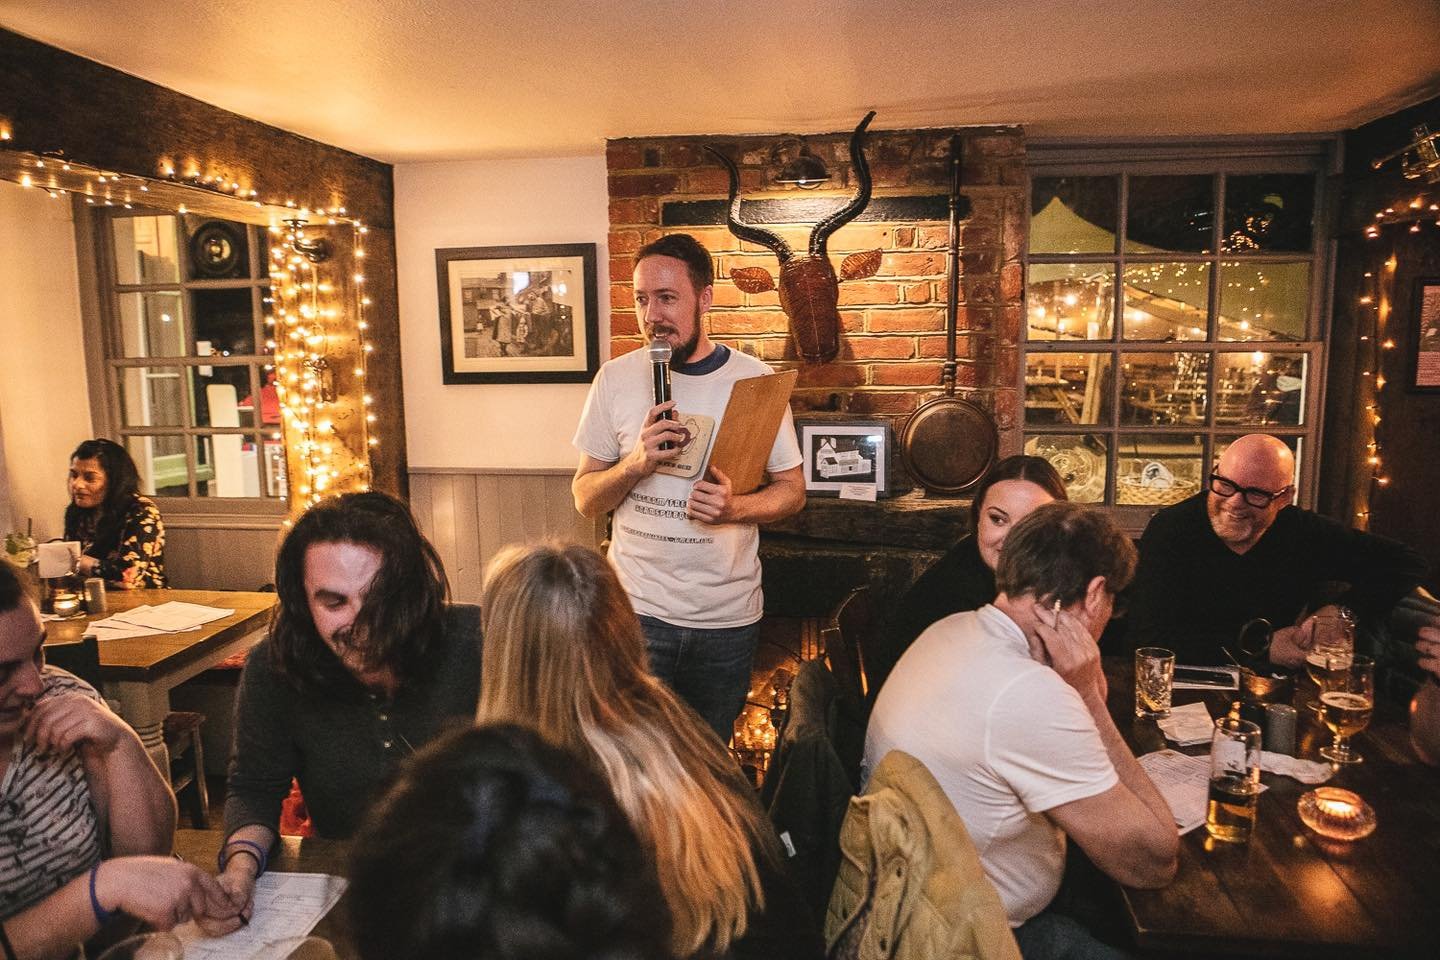 🎉 Get your quiz hats on! Adam is ready to host tonight's quiz at The Royal Oak. 📝 We still have a few spaces left, so gather your team and join us for some brain-teasing fun at 8 pm. See you there! 

#RoyalOakQuizNight #TriviaFun #PubQuiz #QuizNigh